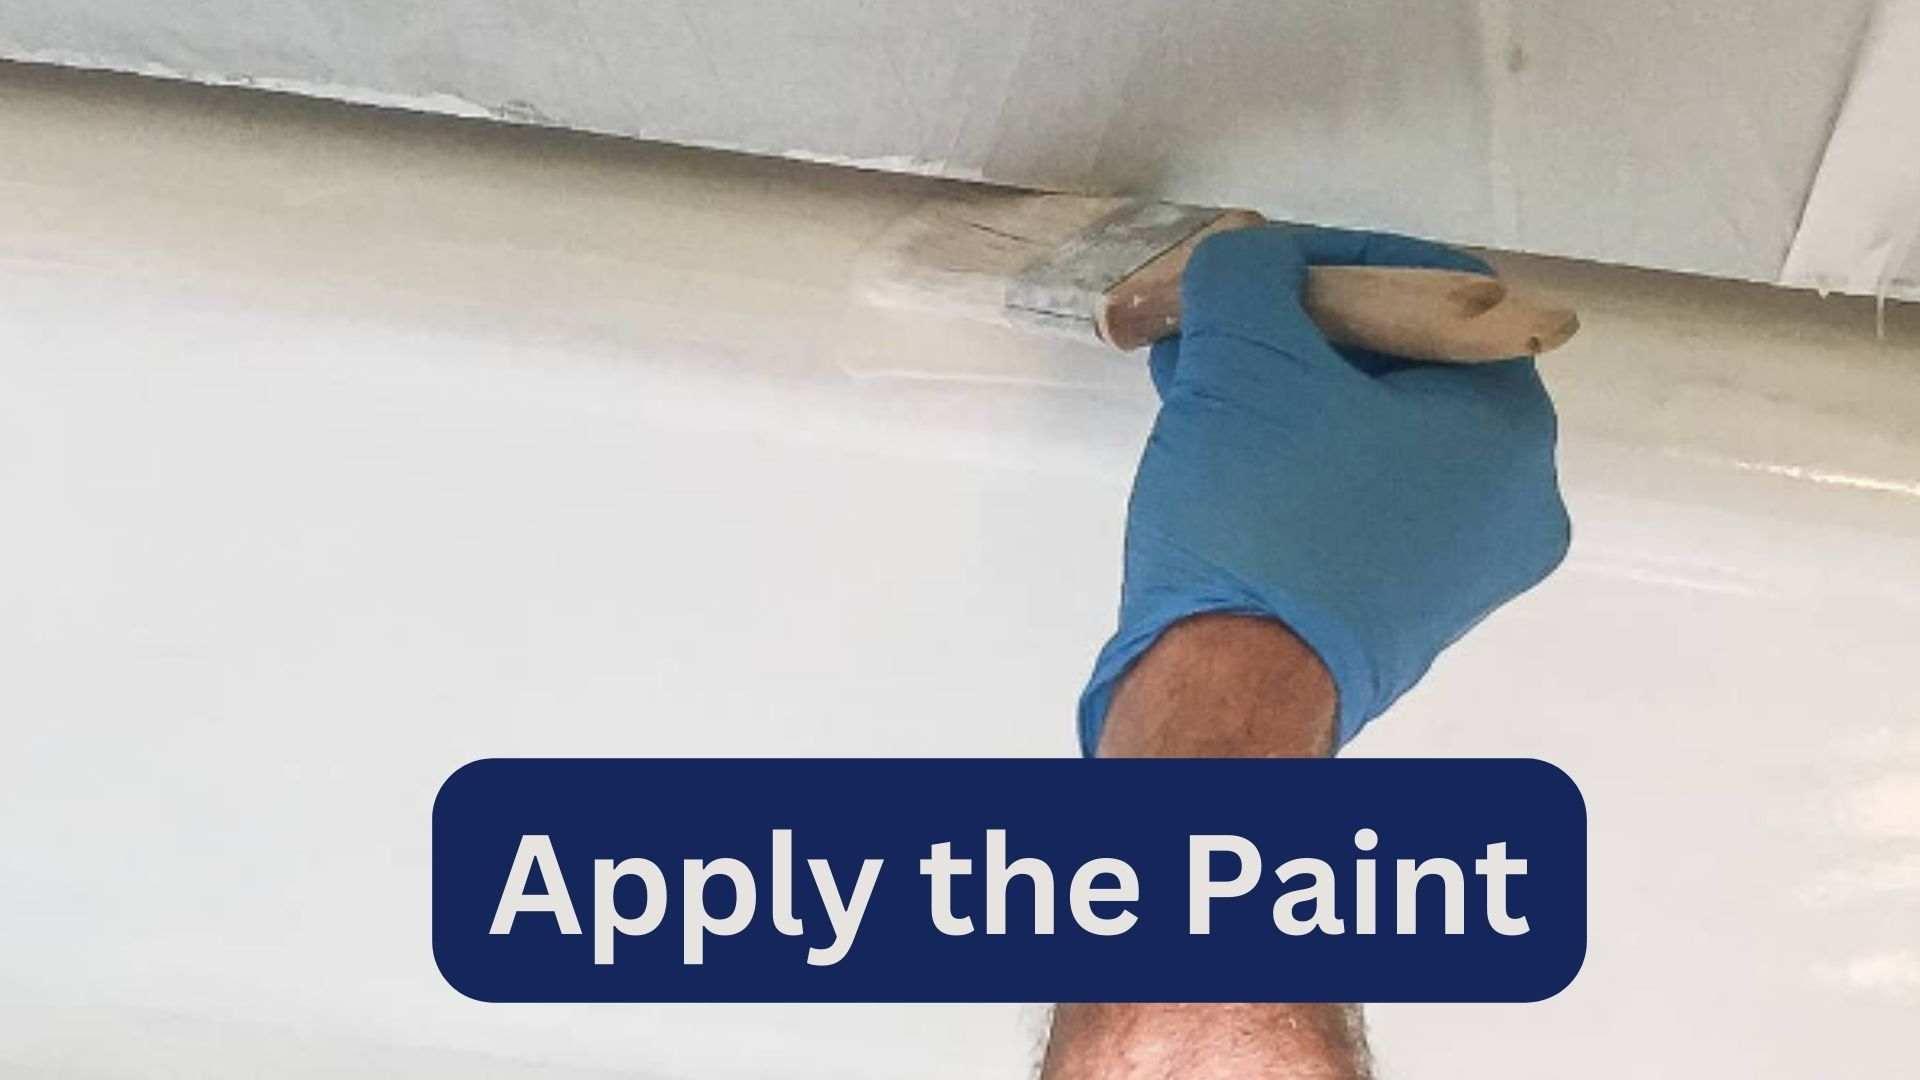 Apply the Paint